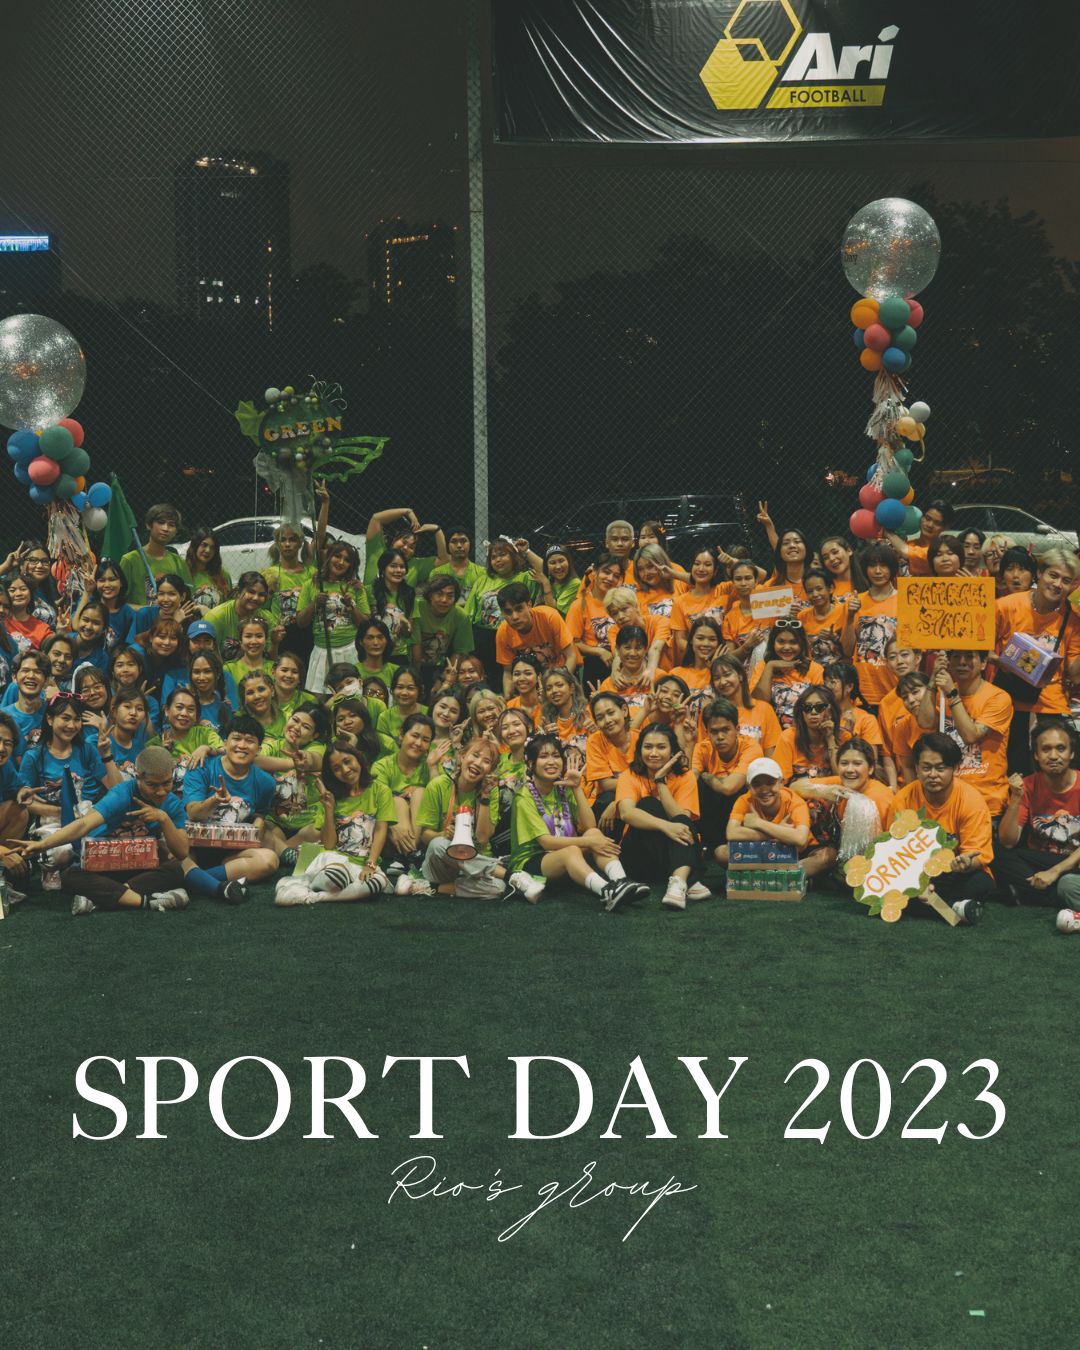 Rio's group sport day 2023 🏆🎊 By Rio's group